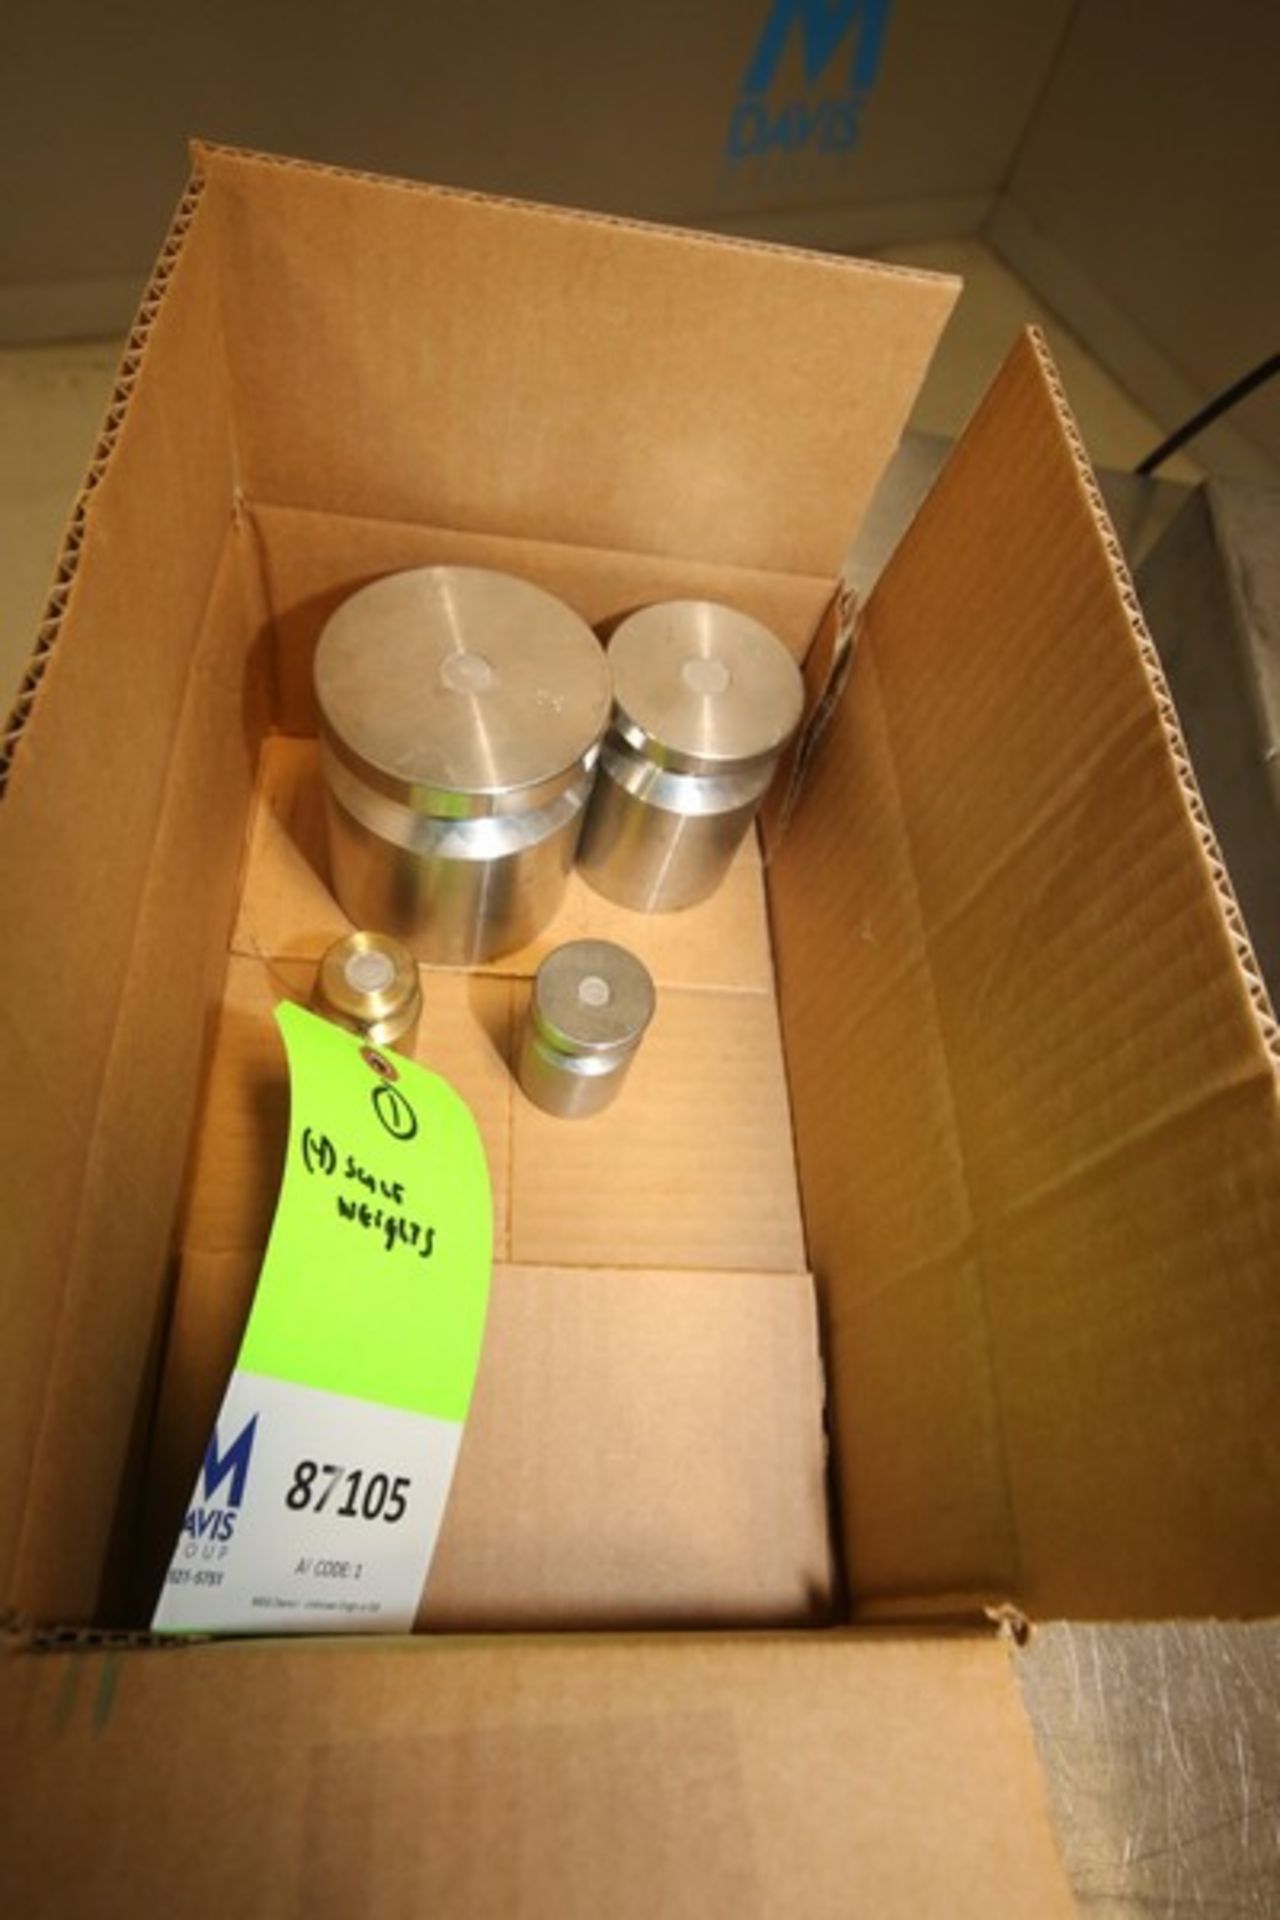 Lot of (4) Scale Weights Including 300g, 1 lb, 5 lb & 10 lb (INV#87105)(Located @ the MDG Auction